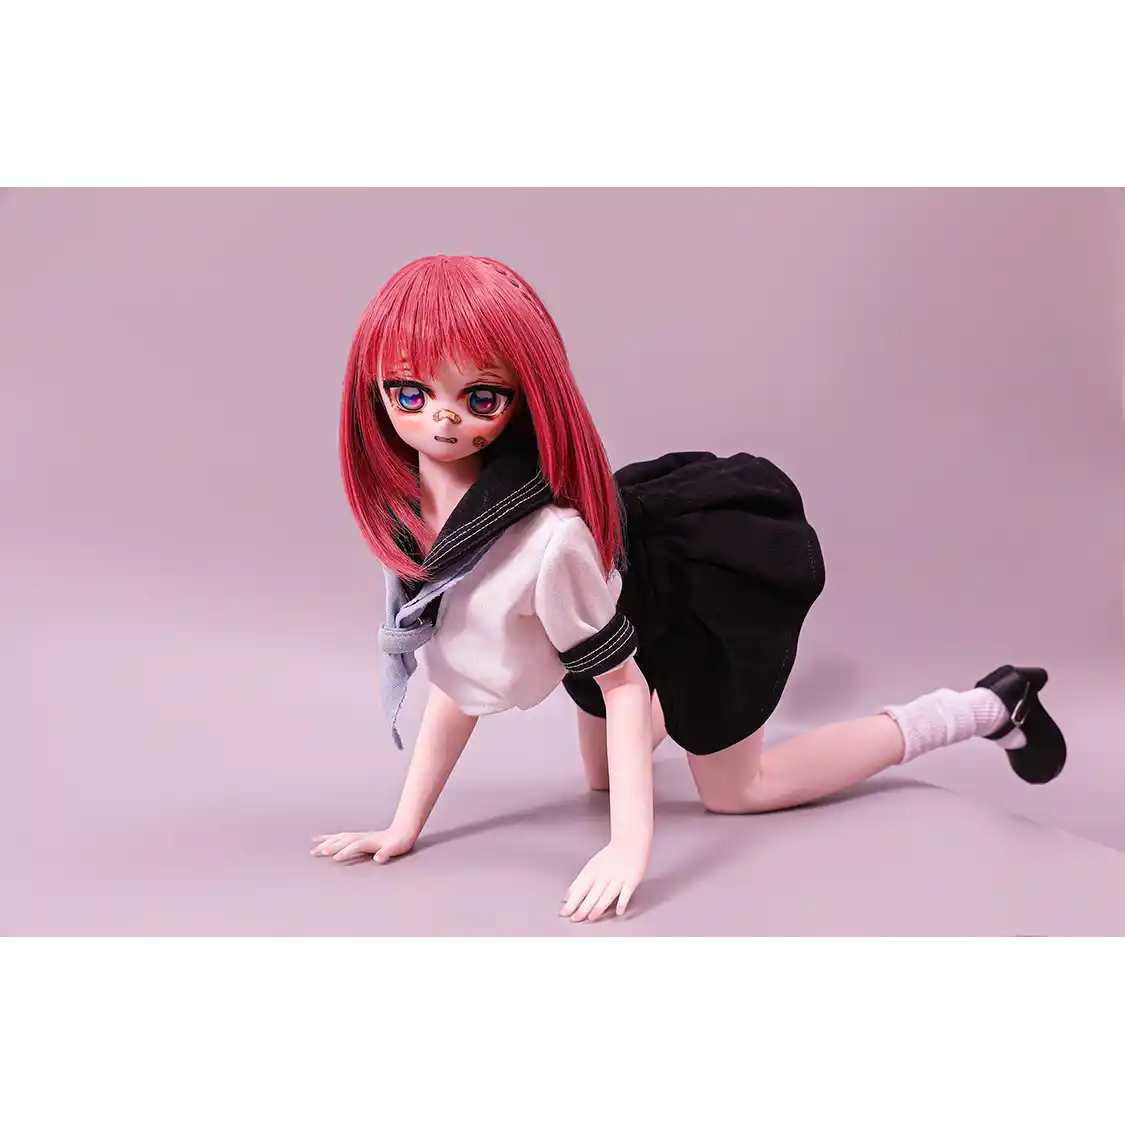 2ft 60cm anime style female mini silicone sex doll with medium breasts, fair skin and a fit athletic body in a school girl outfit.